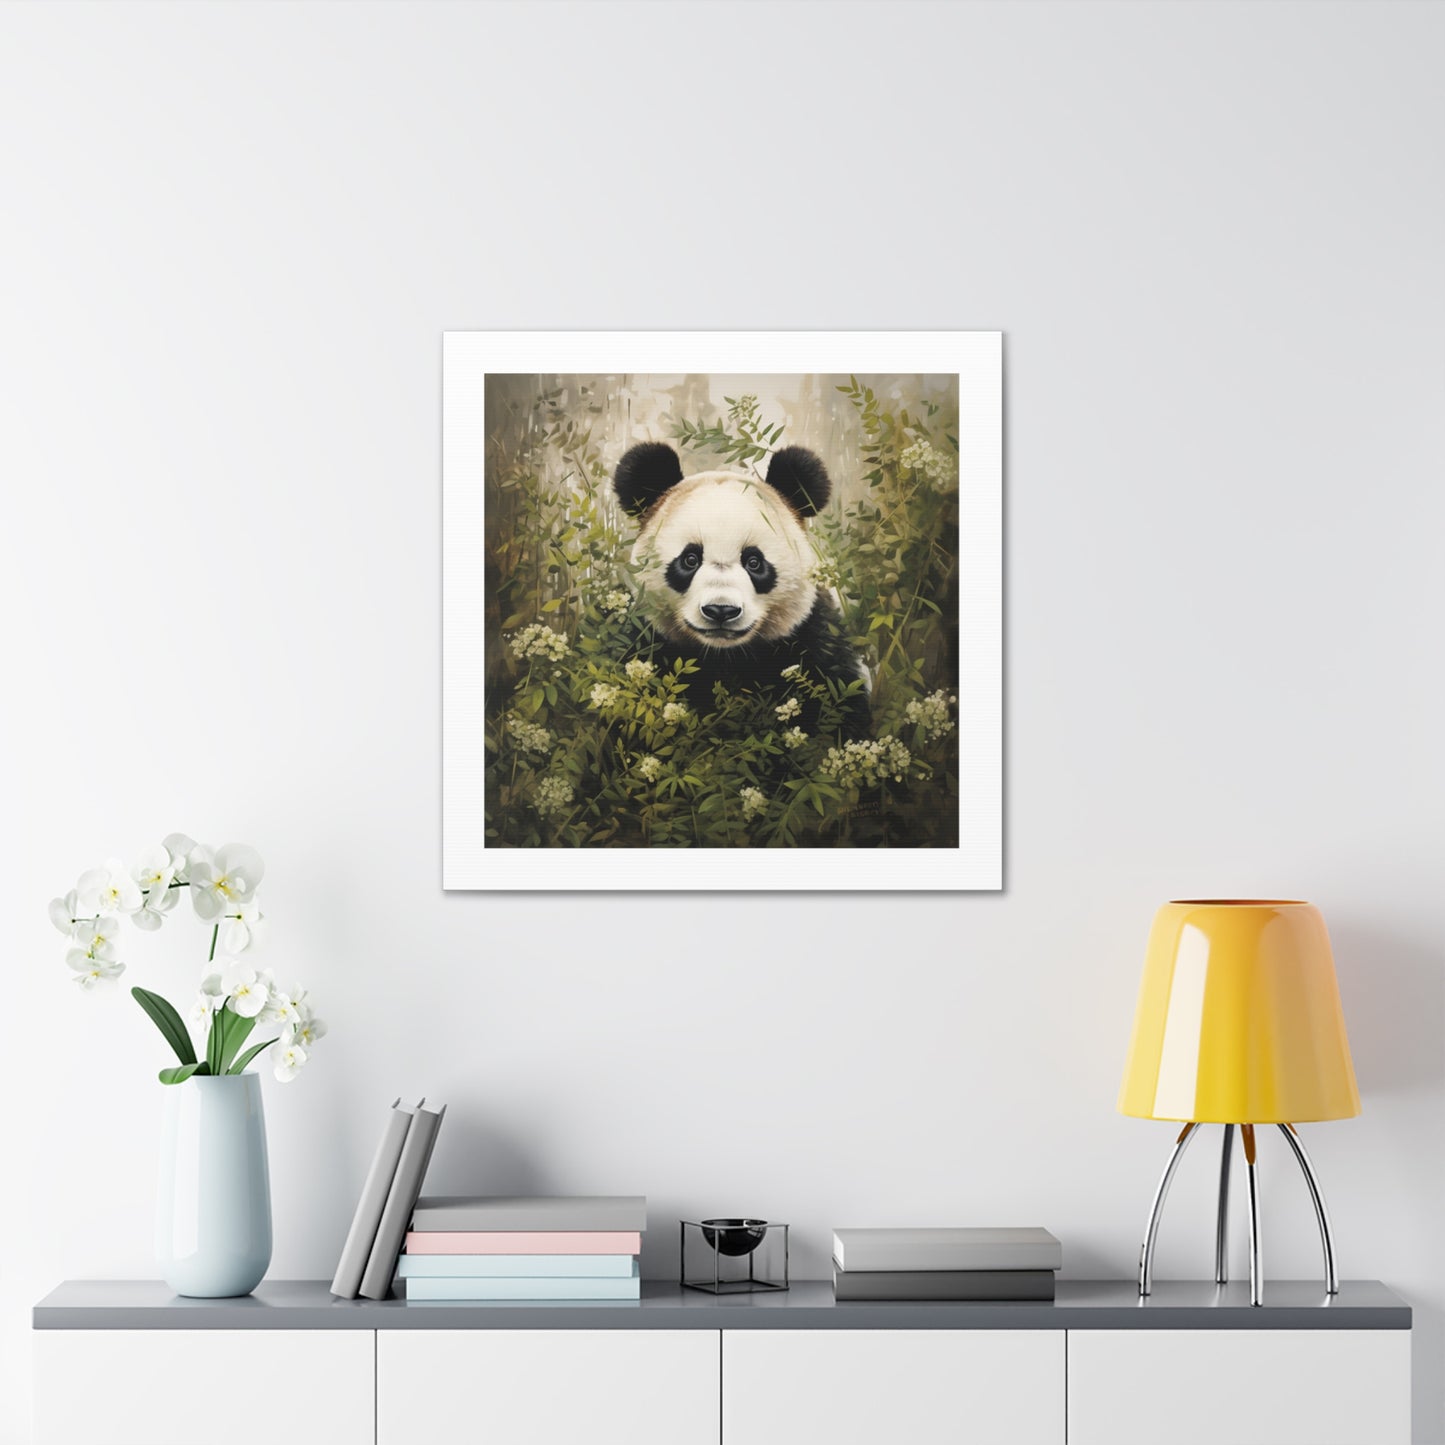 Panda Print with an Artistic Touch